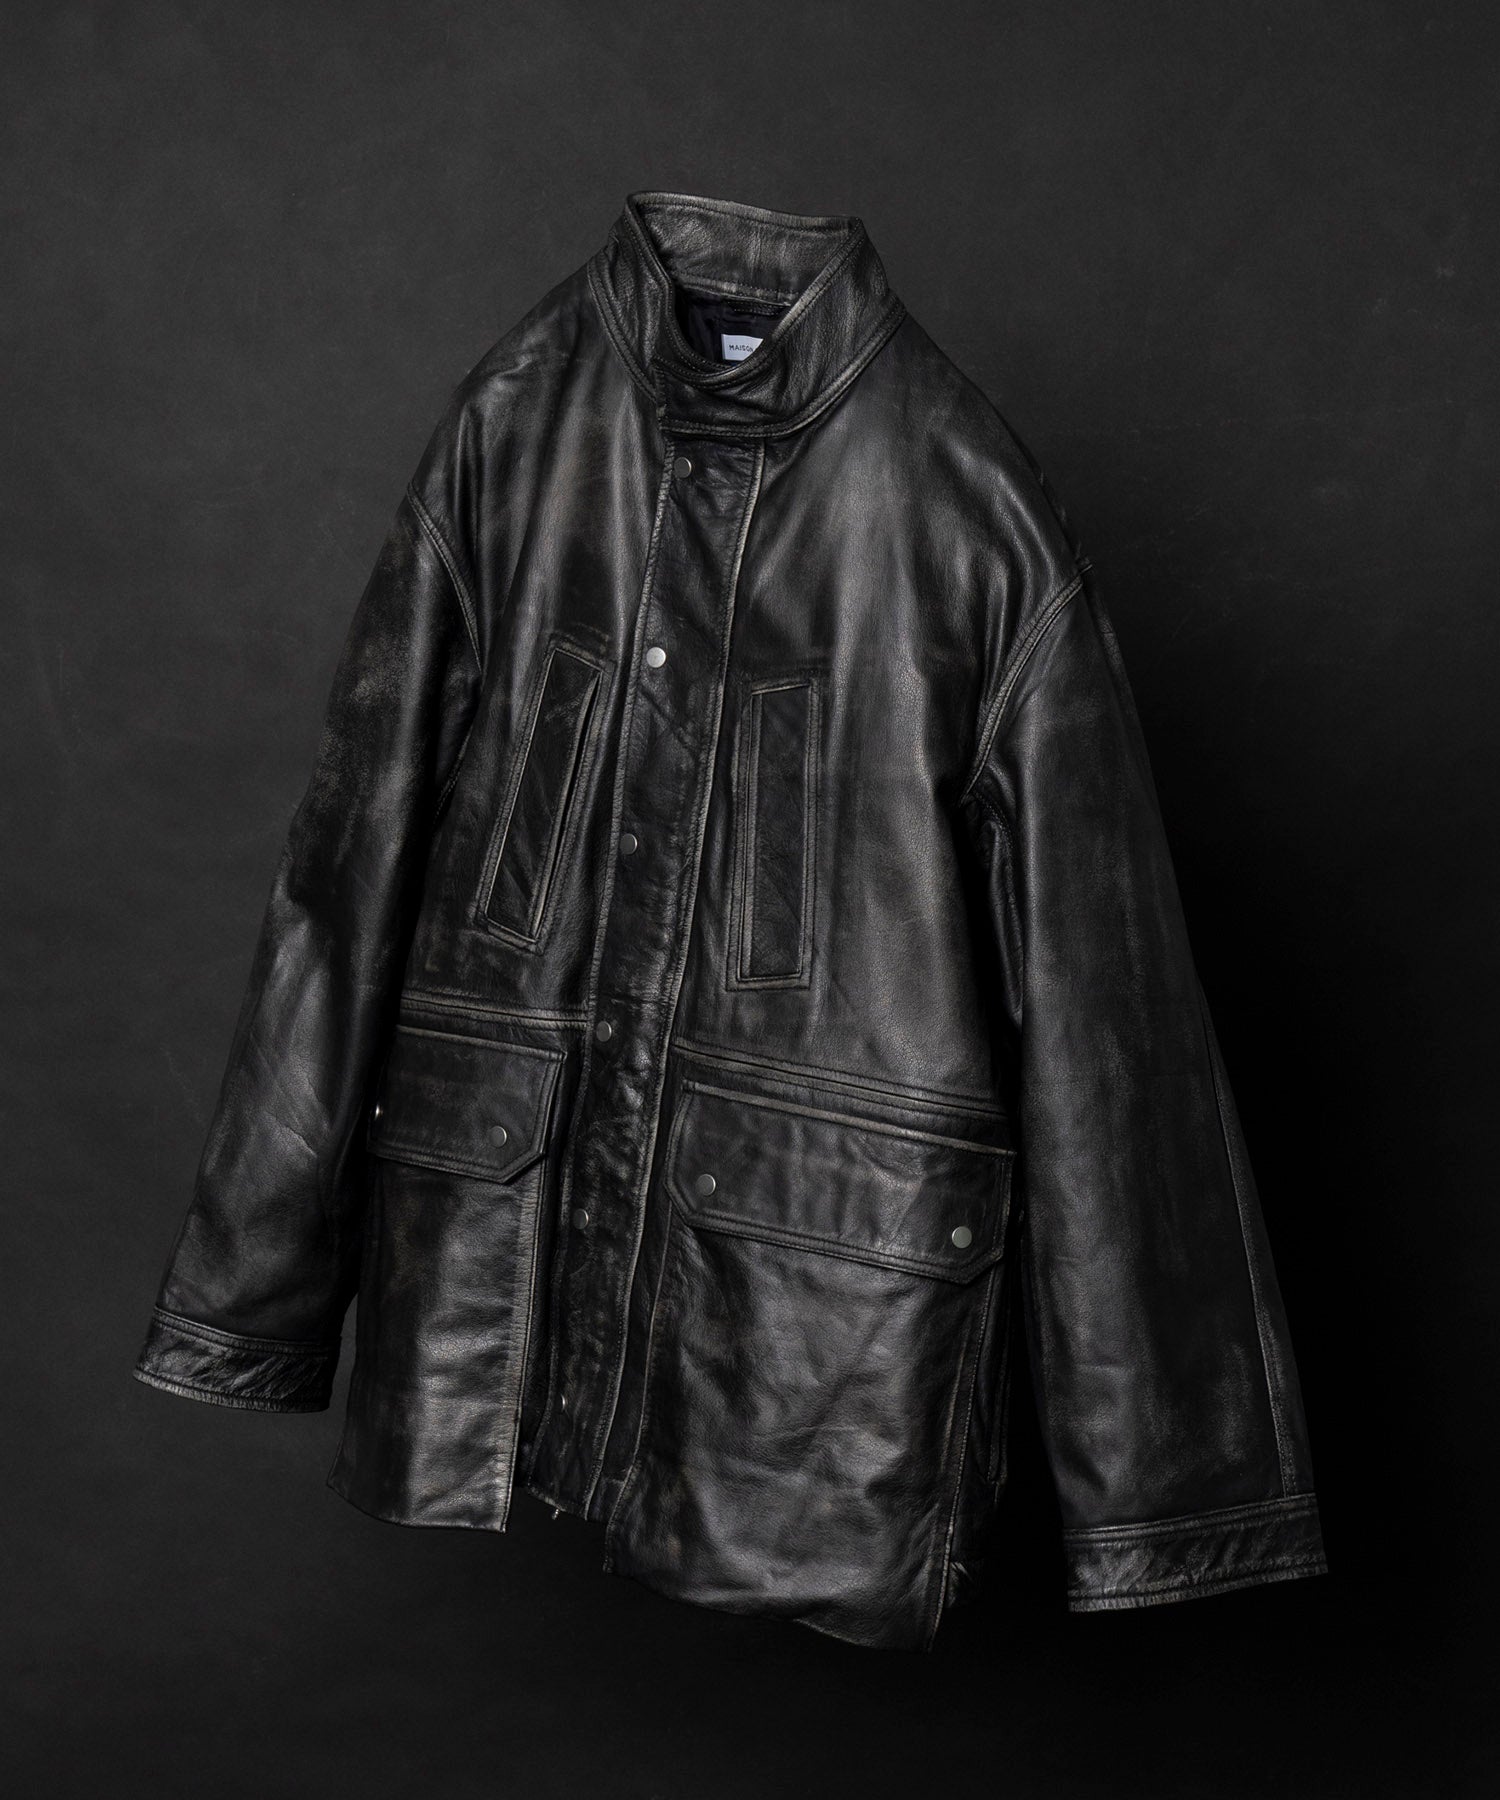 [SALE] Hand Rub-Off Buffalo Leather Prime-Over Hunting Stand Blouson